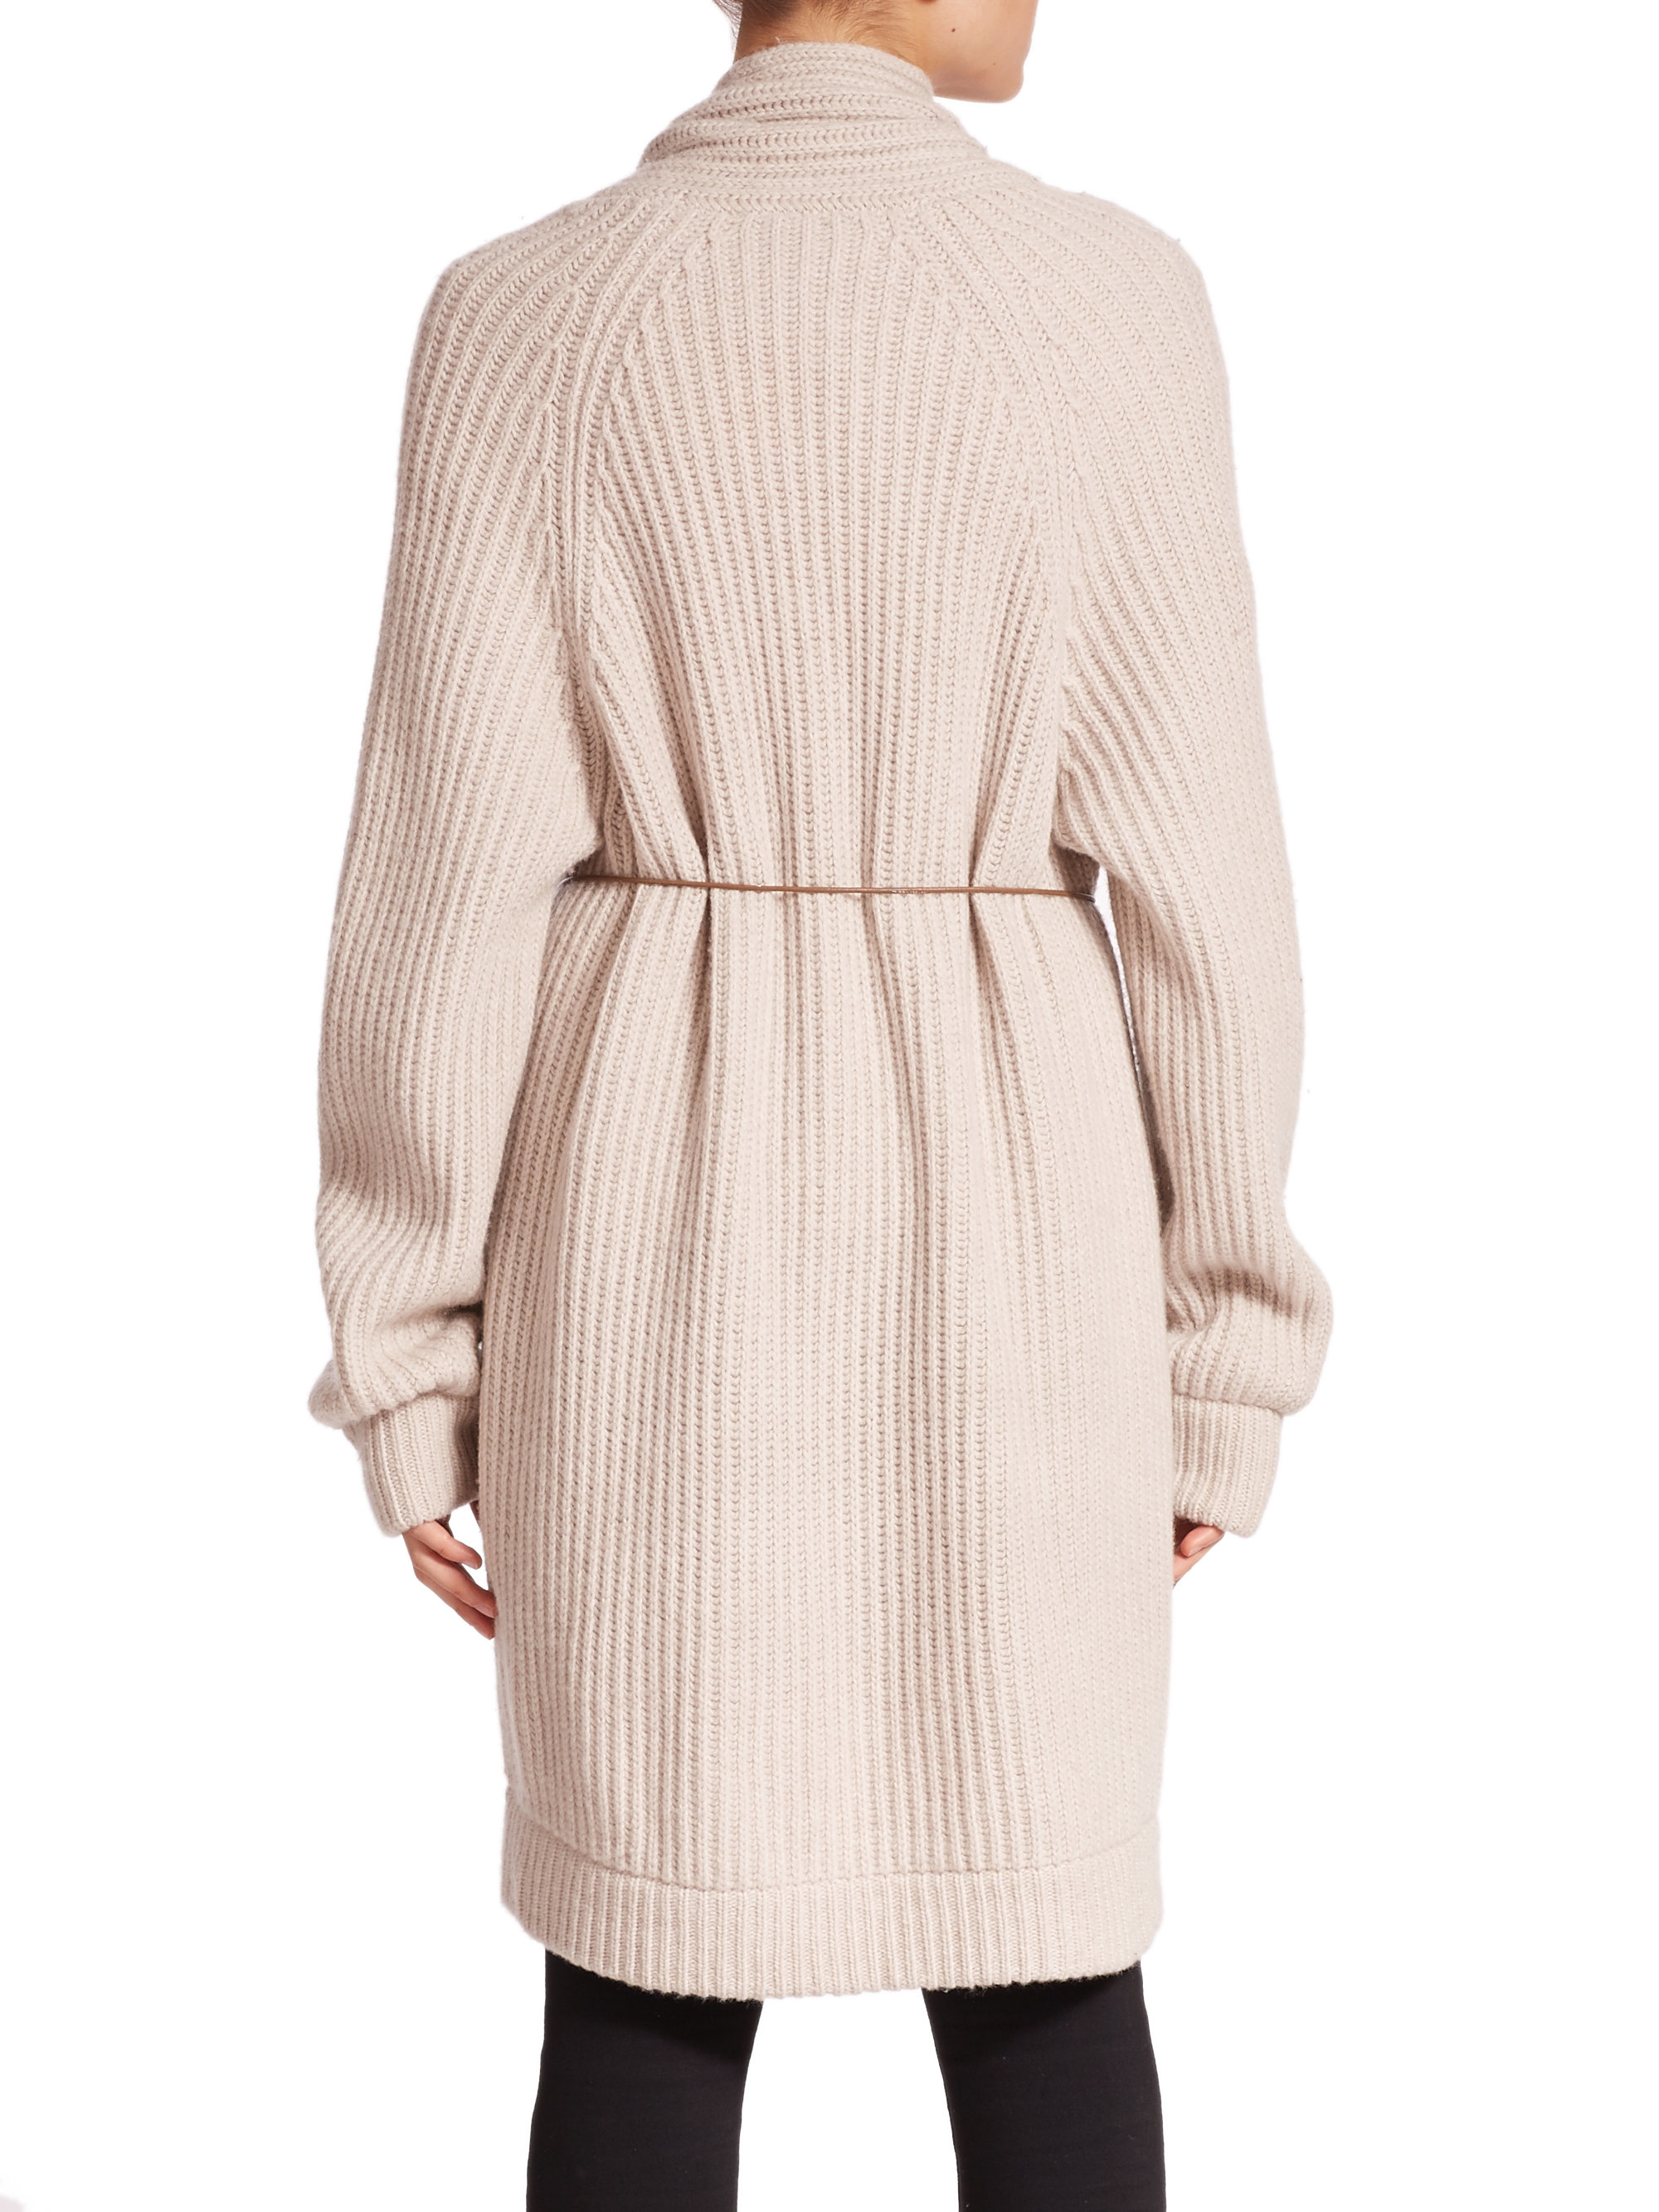 Helmut Lang Wool & Cashmere Belted Long Cardigan in Natural - Lyst